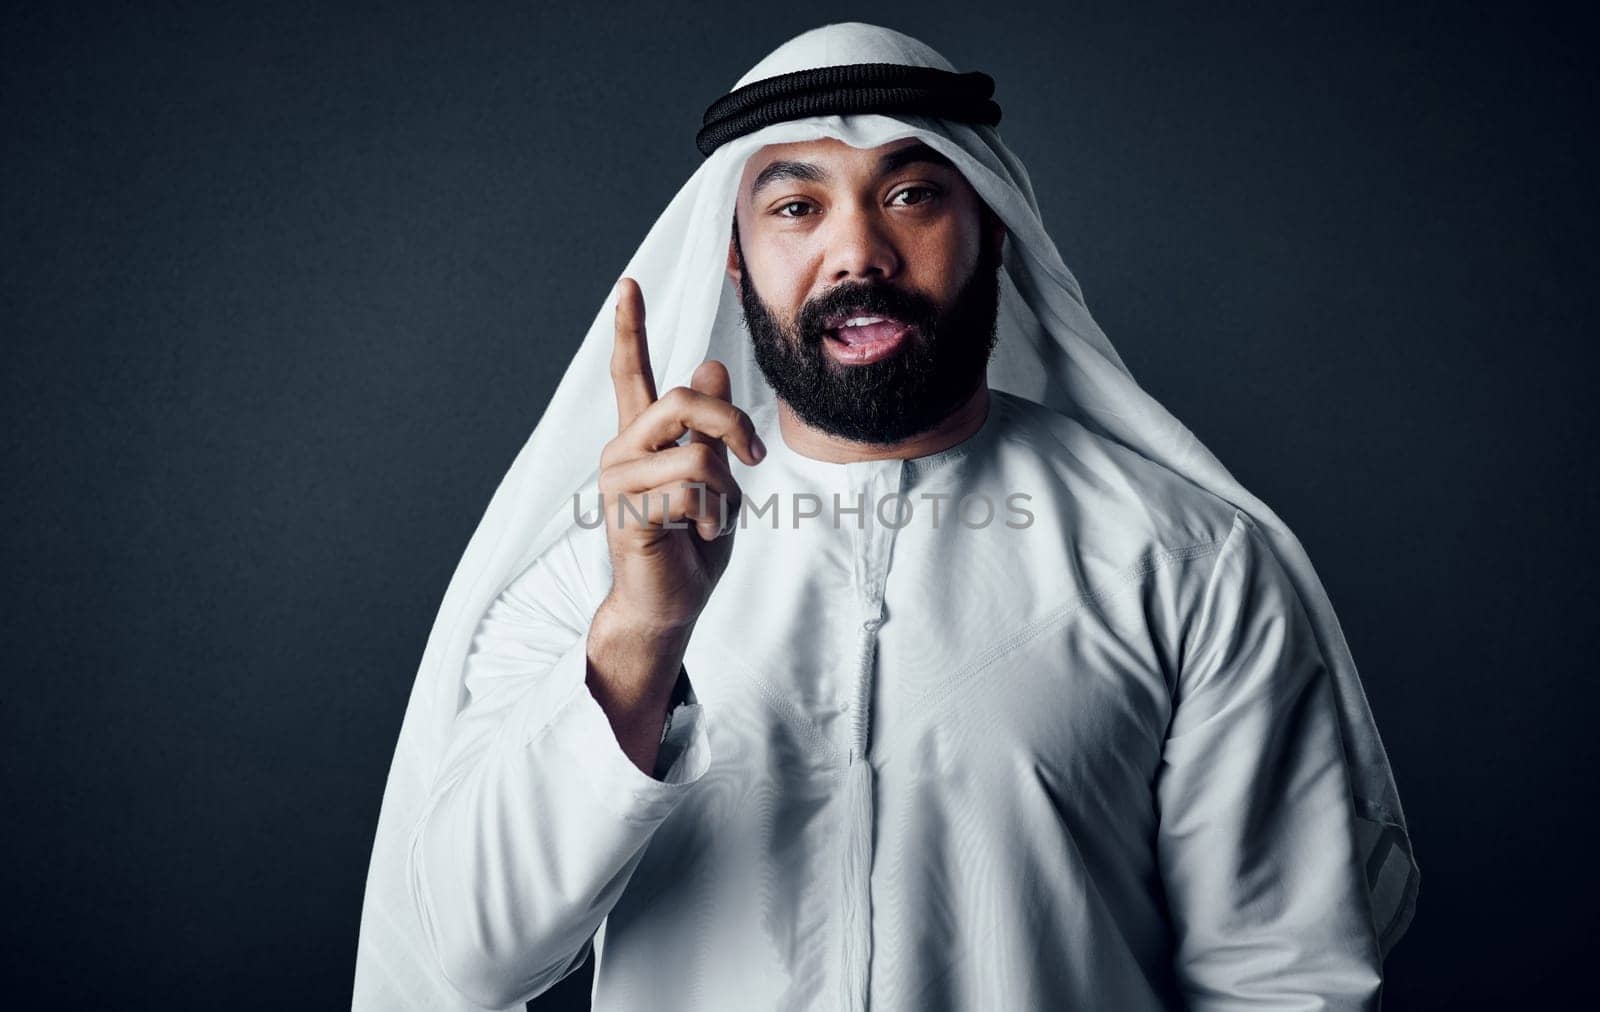 Do the things that scare you. Studio shot of a young man dressed in Islamic traditional clothing posing against a dark background